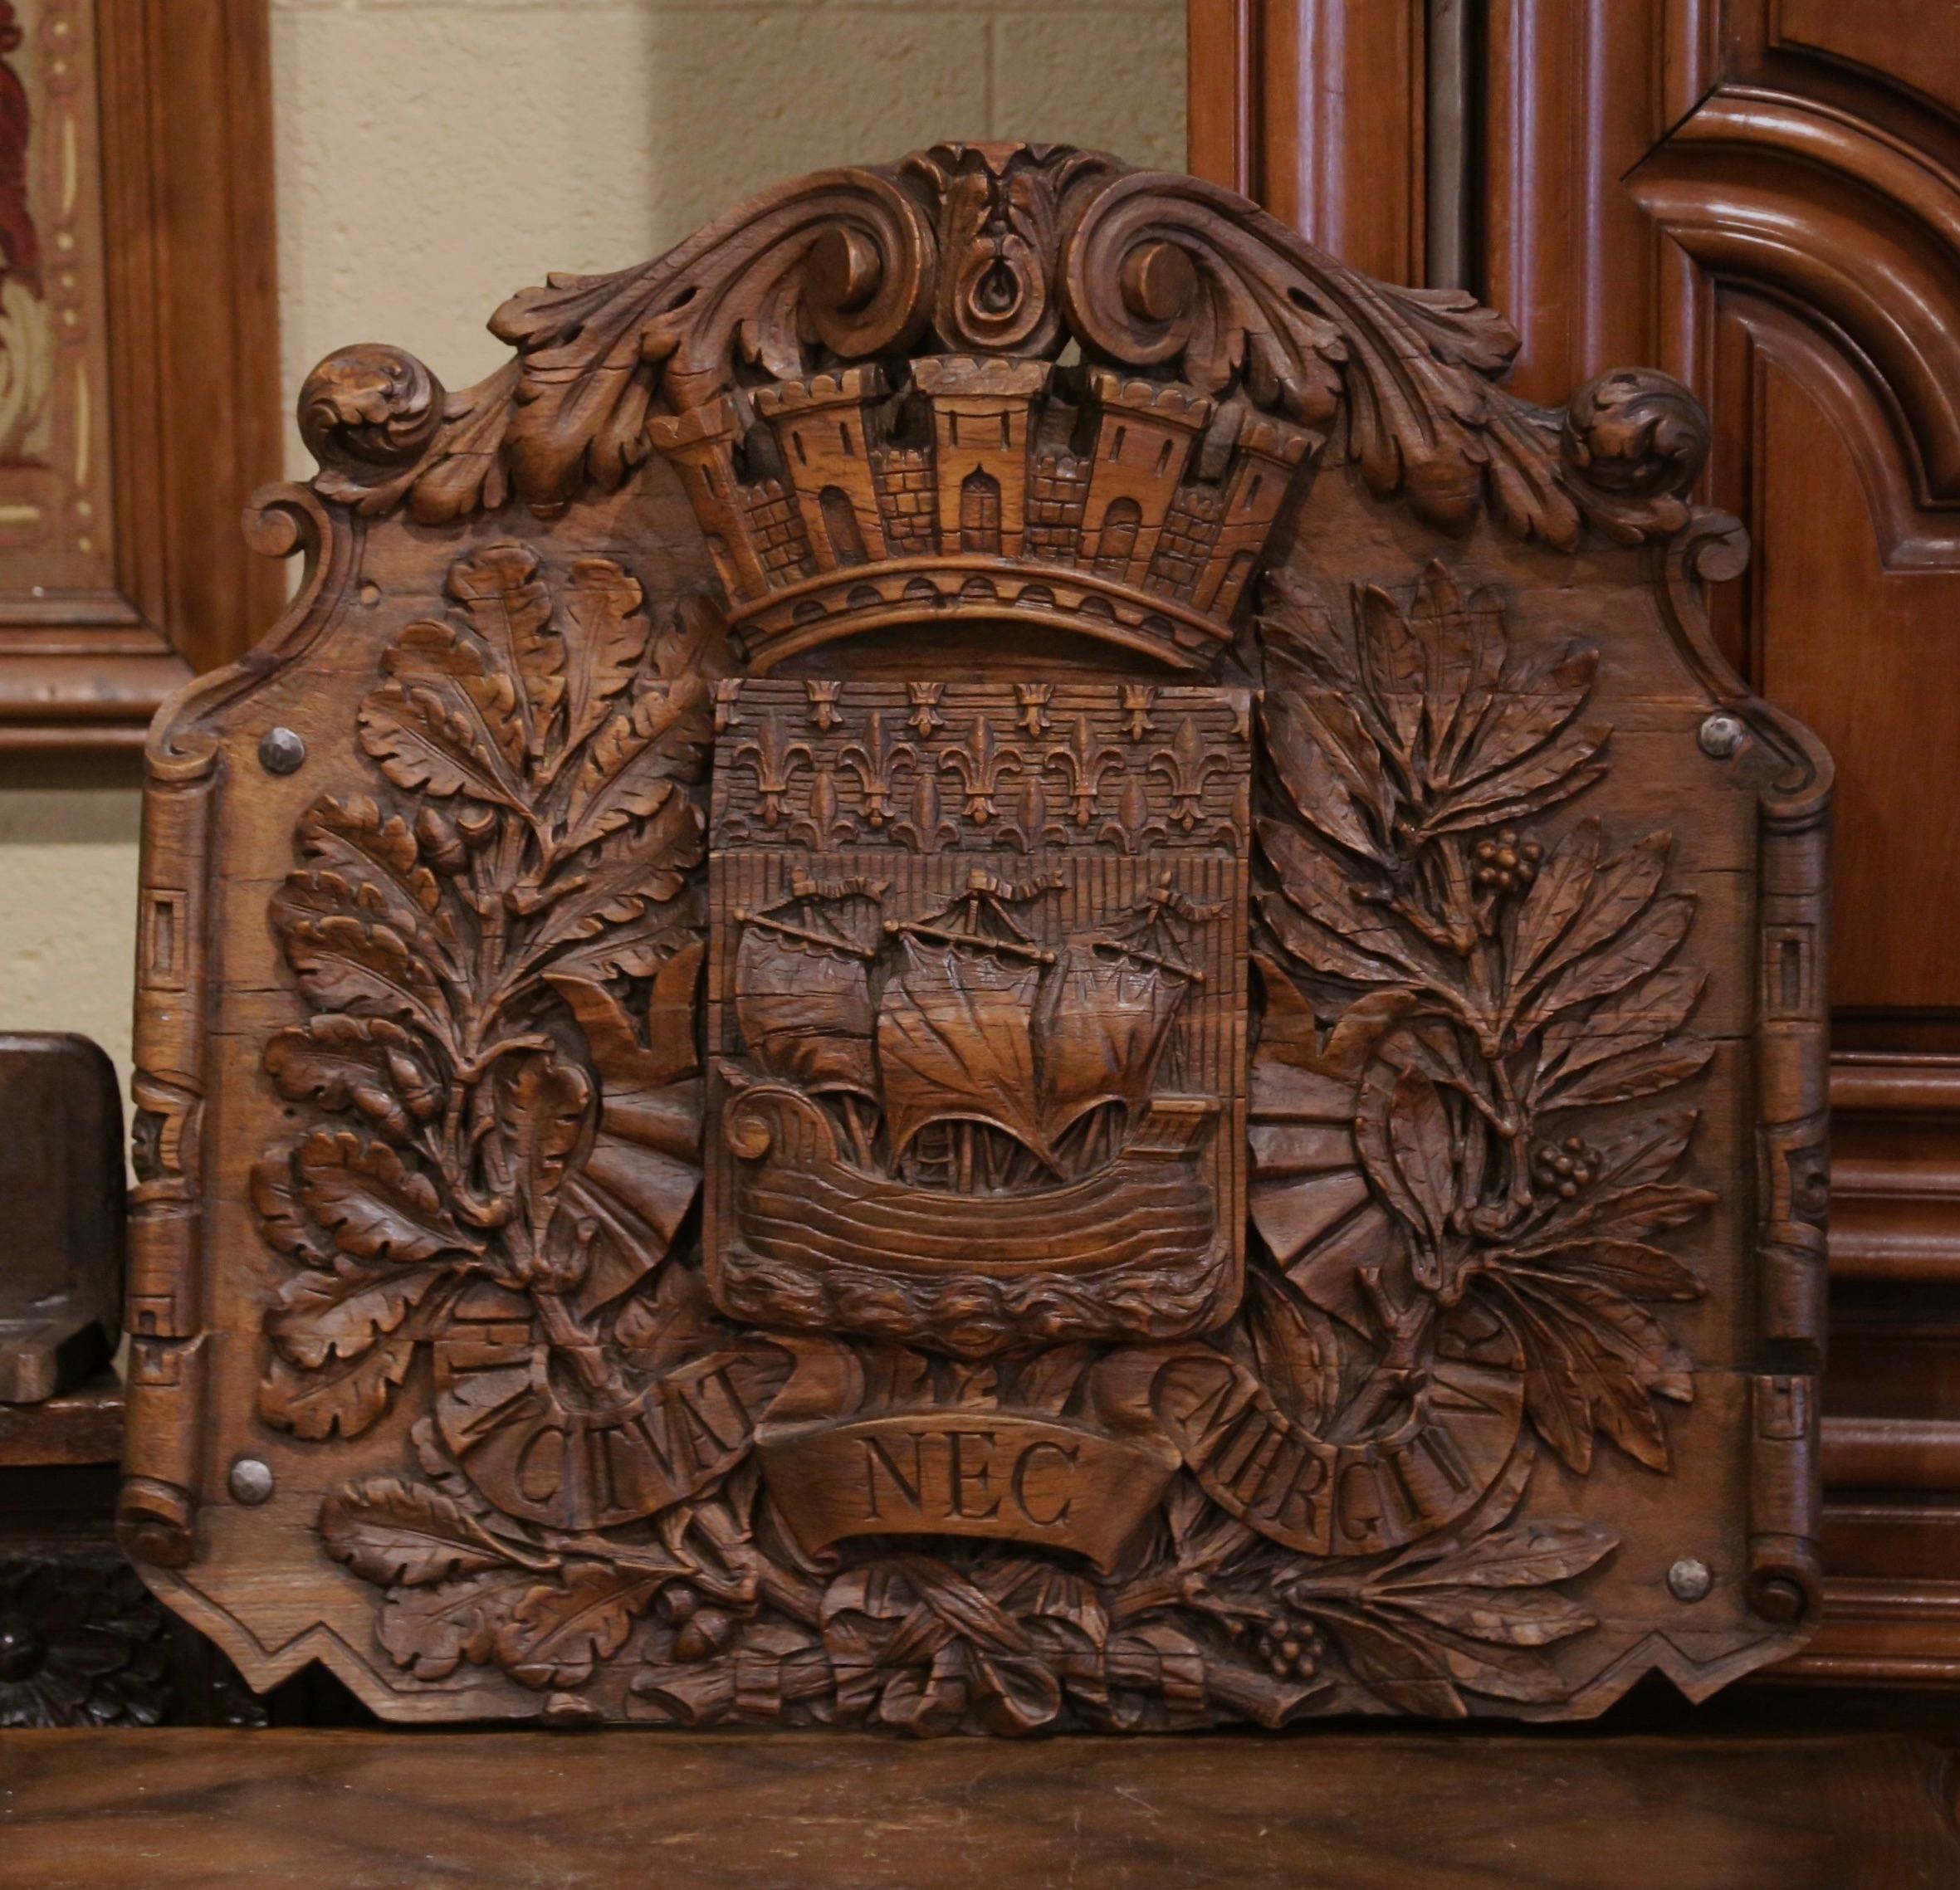 19th Century French Carved Walnut Royal Coat-of-Arms of the City of Paris In Excellent Condition For Sale In Dallas, TX